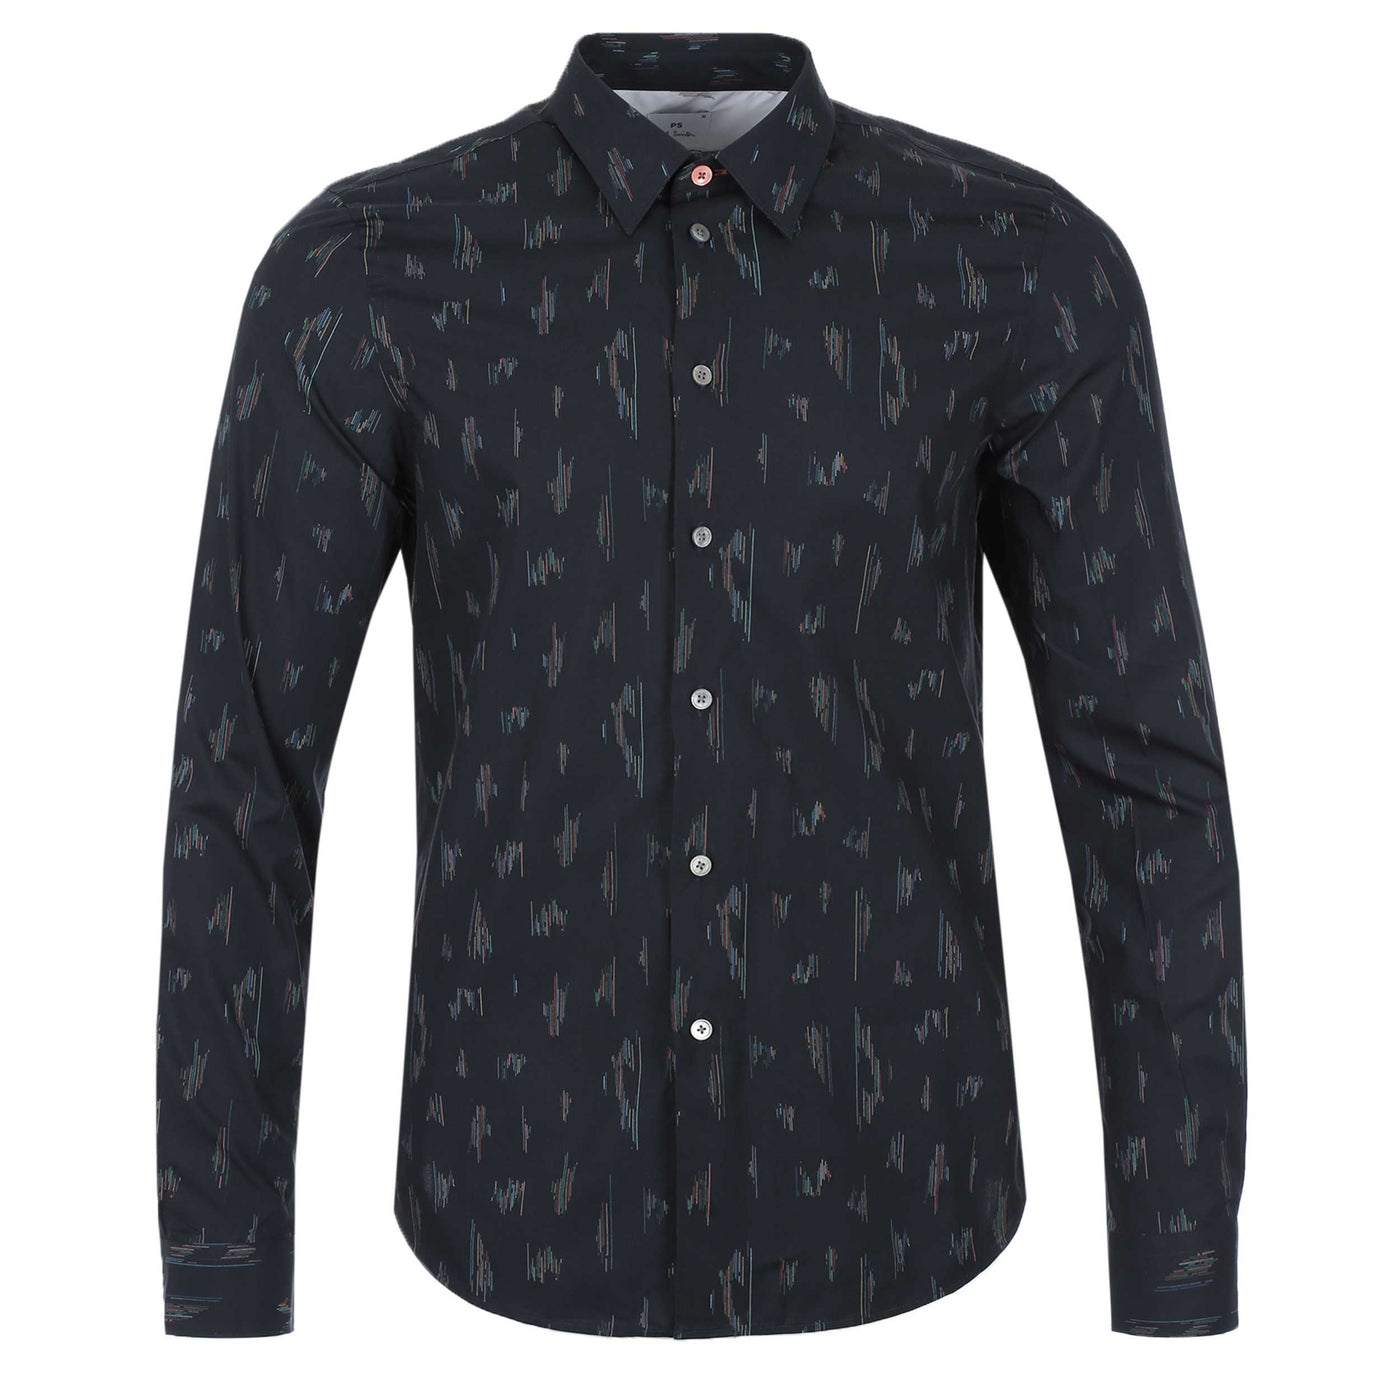 Paul Smith Tailored Fit Shirt in Black